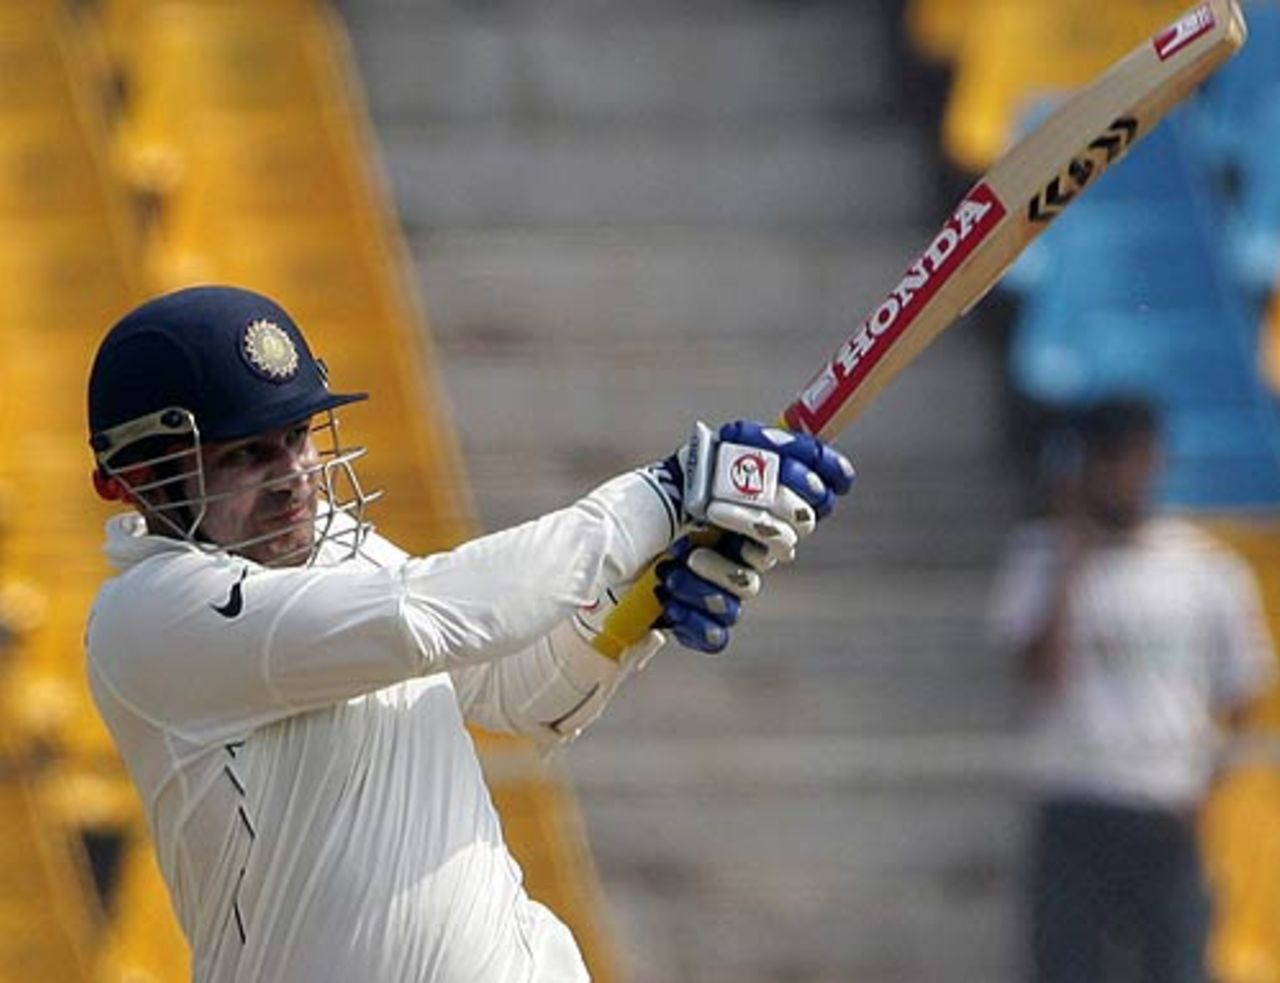 Virender Sehwag raced away with a flurry of strokes early before falling for 17, India v South Africa, 2nd Test, Ahmedabad, 3rd day, April 5, 2008